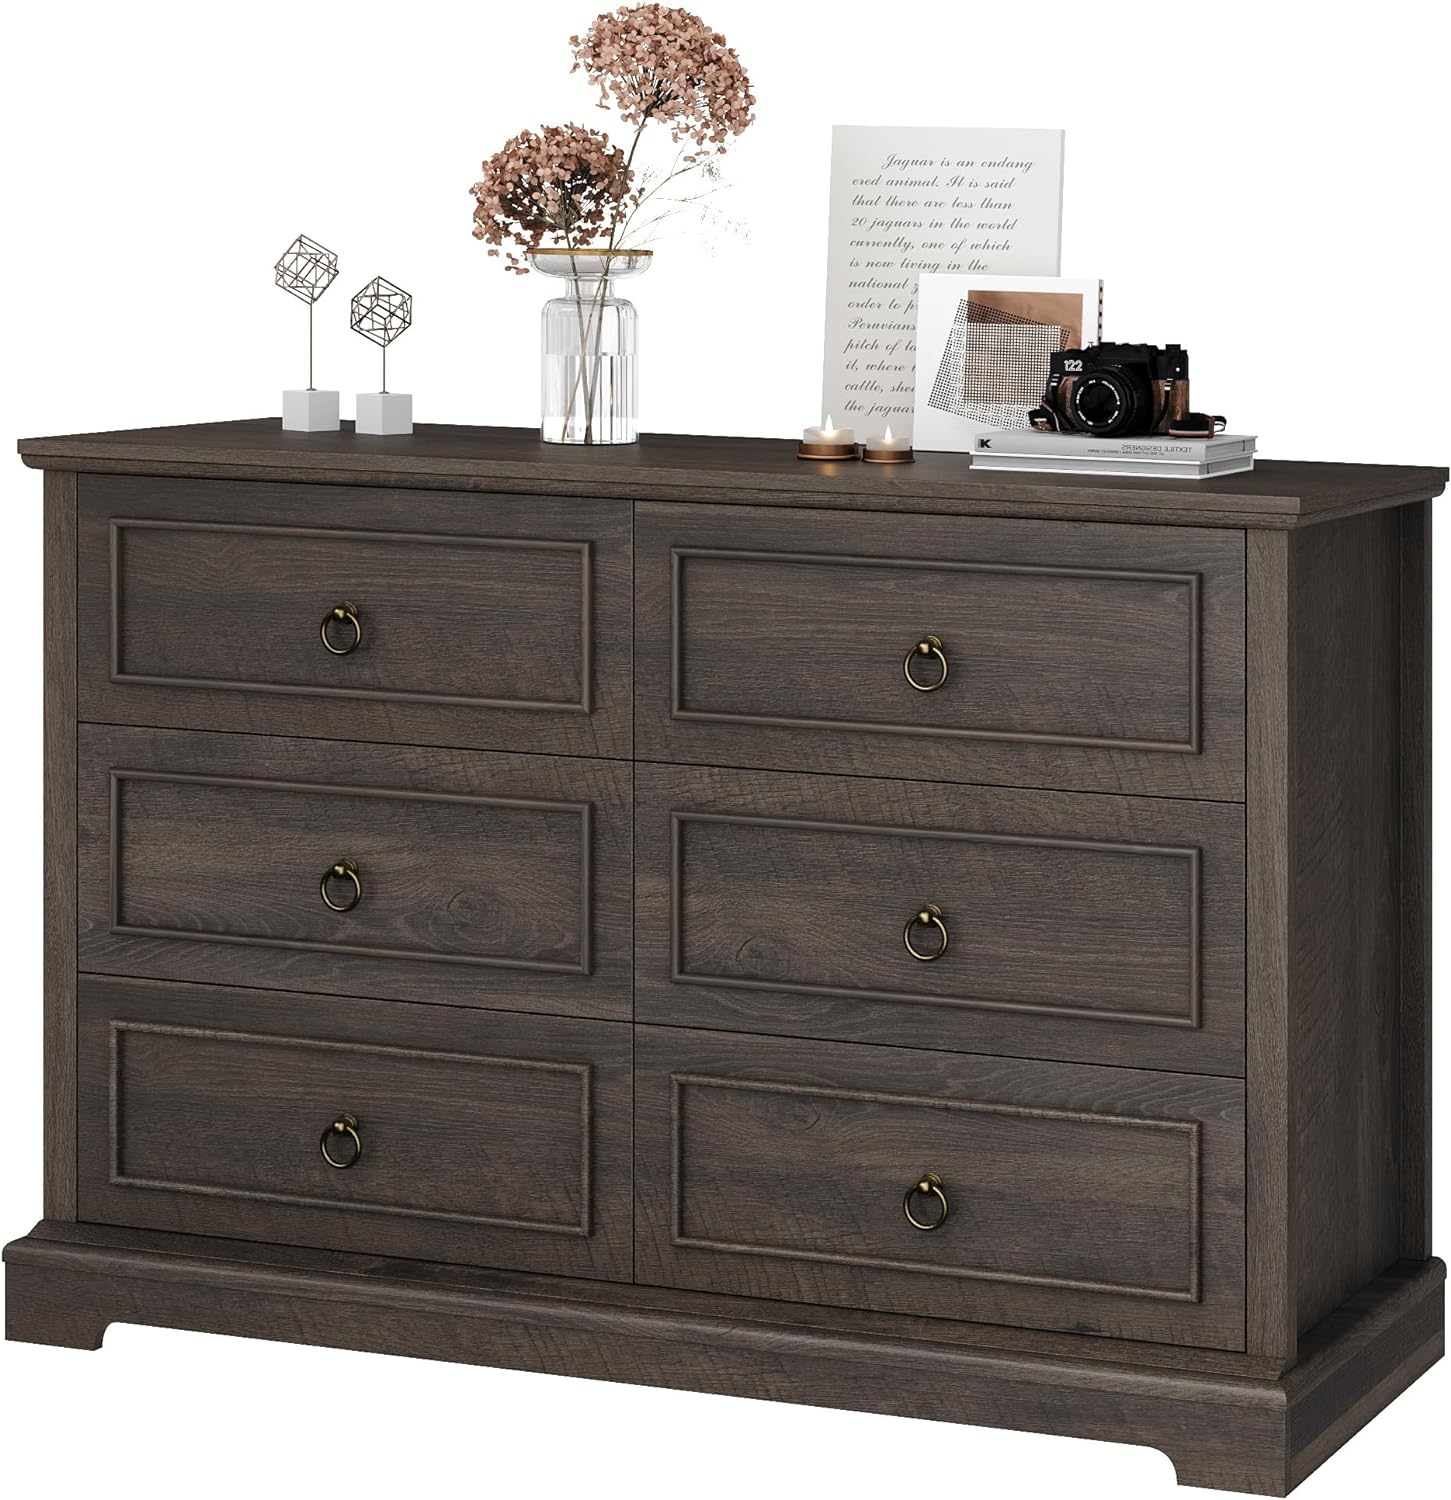 We got this for our sons room and it is great! This is a very sturdy dresser and isnt lightweight. It did take about an hour to assemble myself, but it was definitely worth it. The directions were easy to follow so there was no issue. The drawers roll smoothly, and the wood itself has a very nice finish which is also easy to maintain and clean.